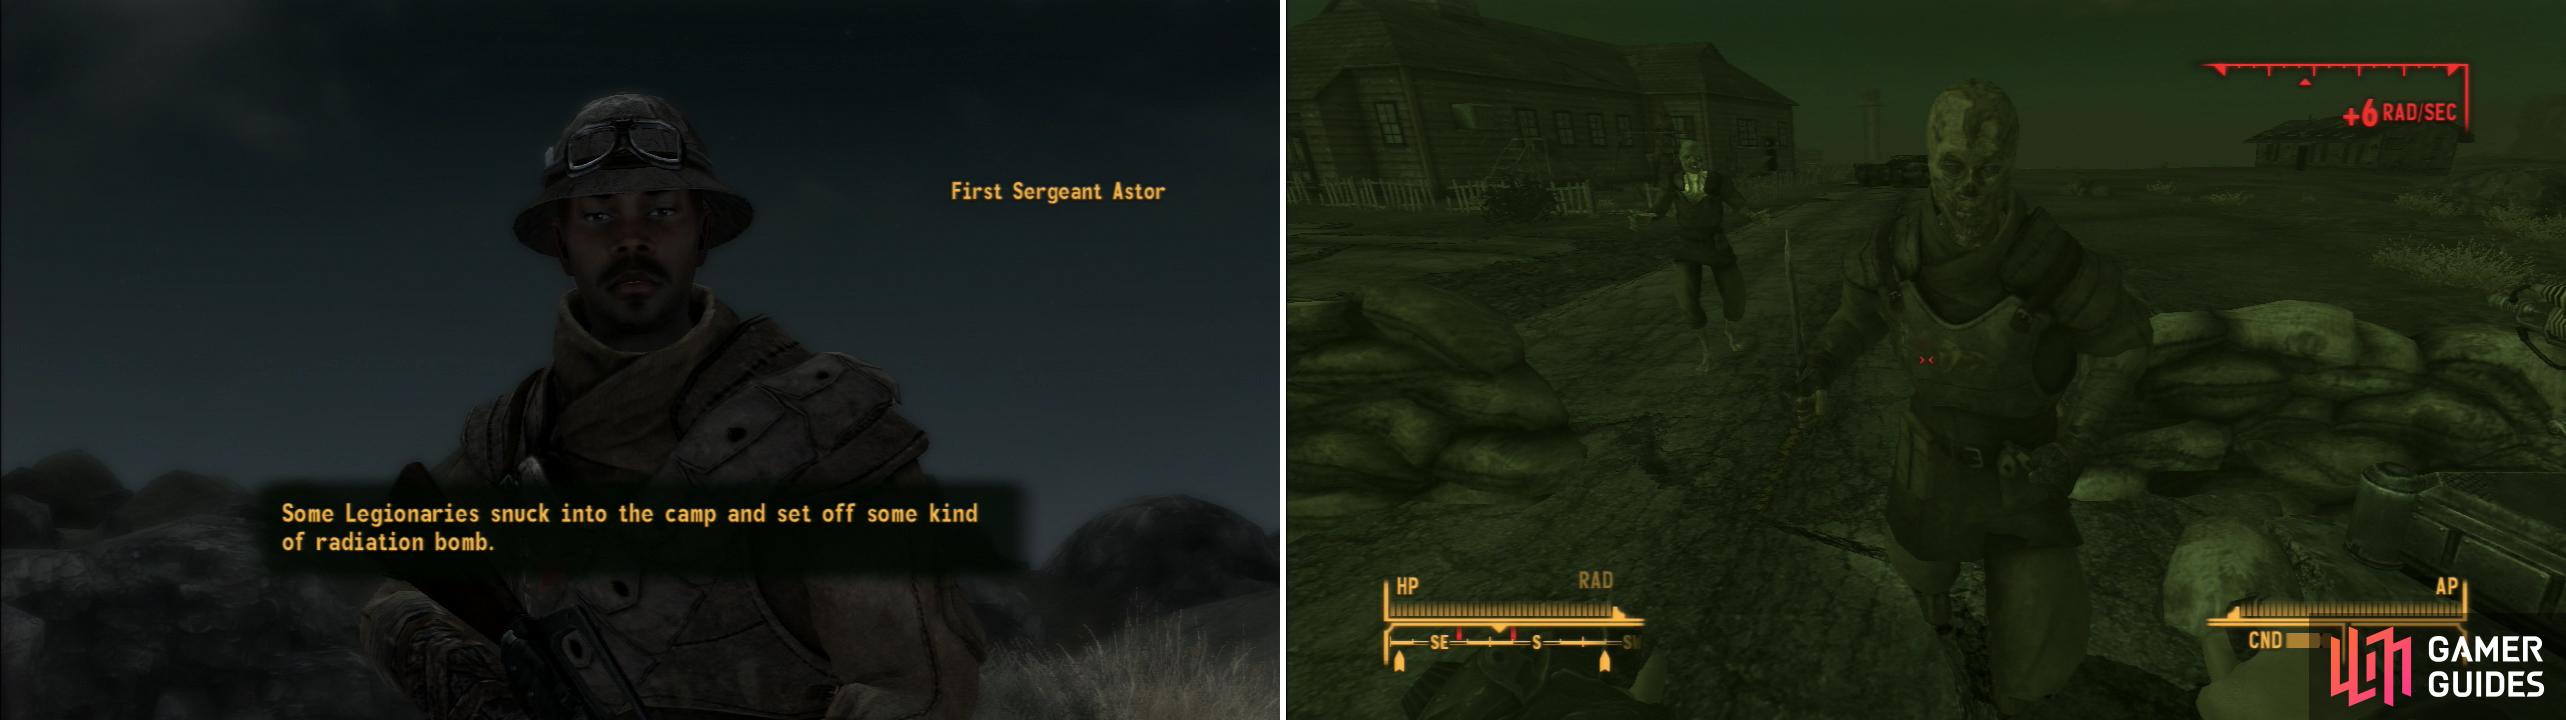 Find Sergeant Astor to learn what happened at Searchlight (left), which is now infested with the ghoulified NCR Troopers (right).